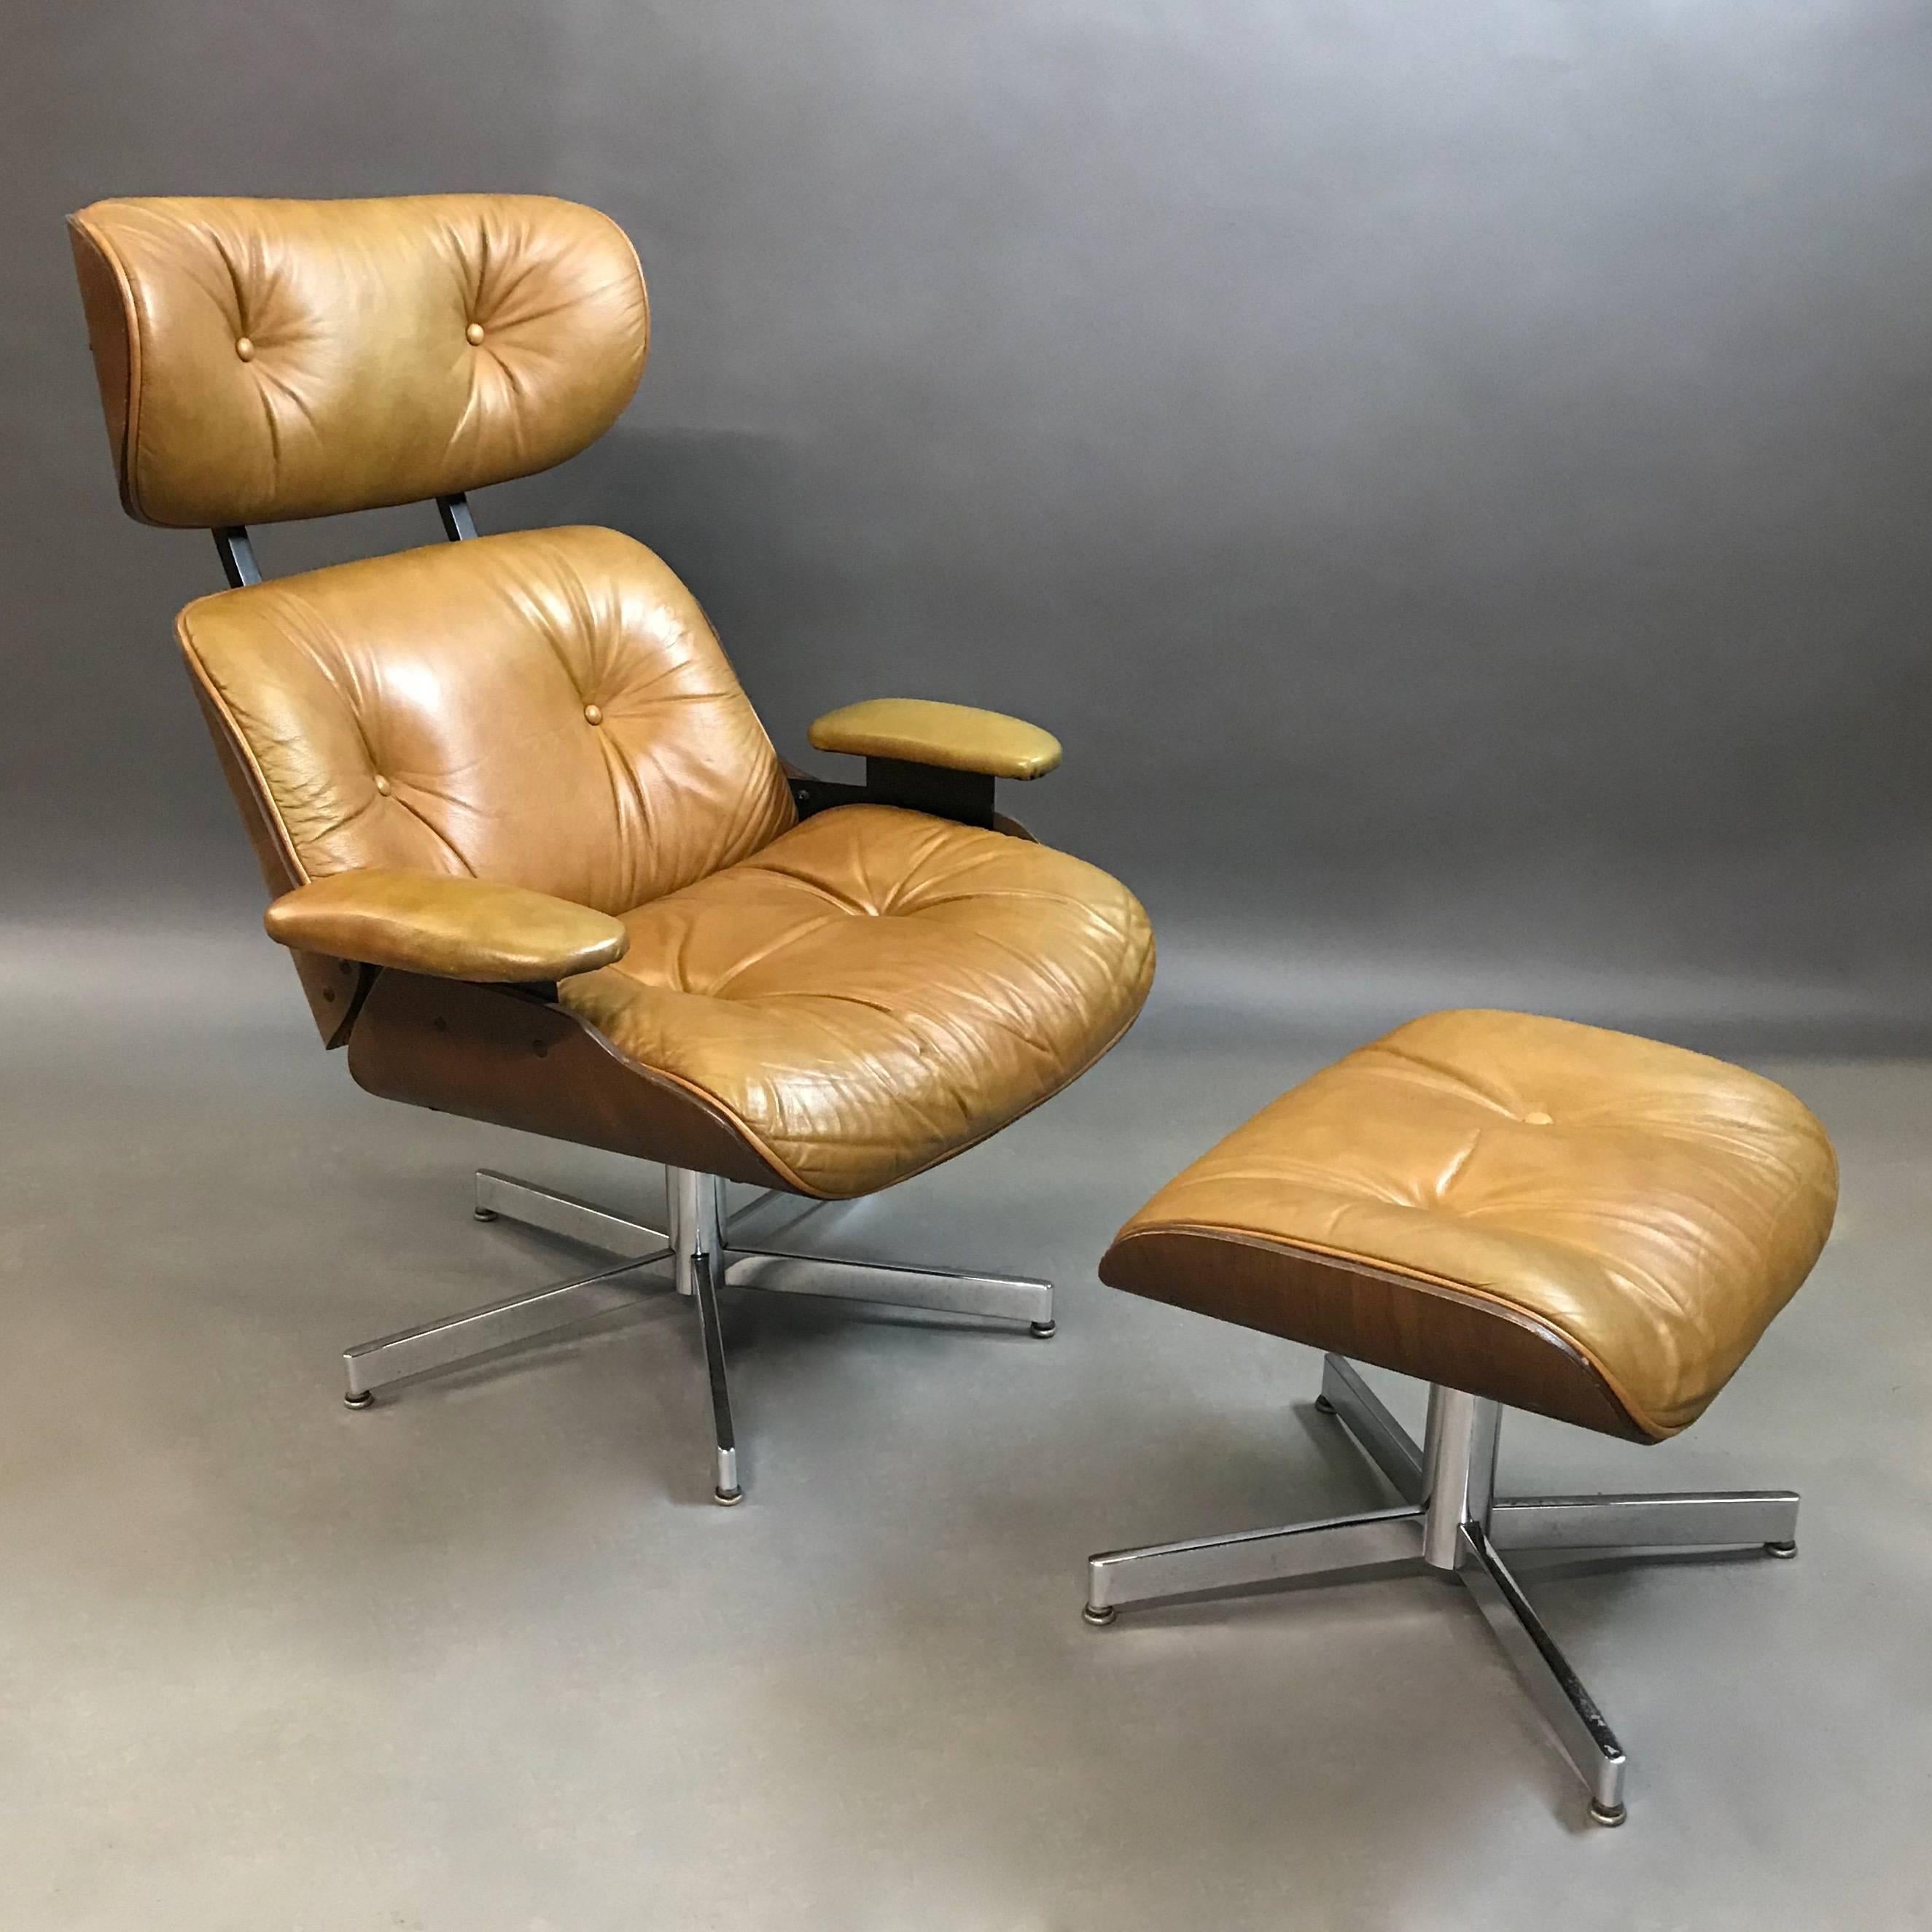 Tan leather lounge chair with matching ottoman by George Mulhauser for Plycraft features a bent walnut body with chromed metal bases. The chair has an adjustable spring for reclining. The Ottoman measures 21.50in w x 17in d x 15in ht.